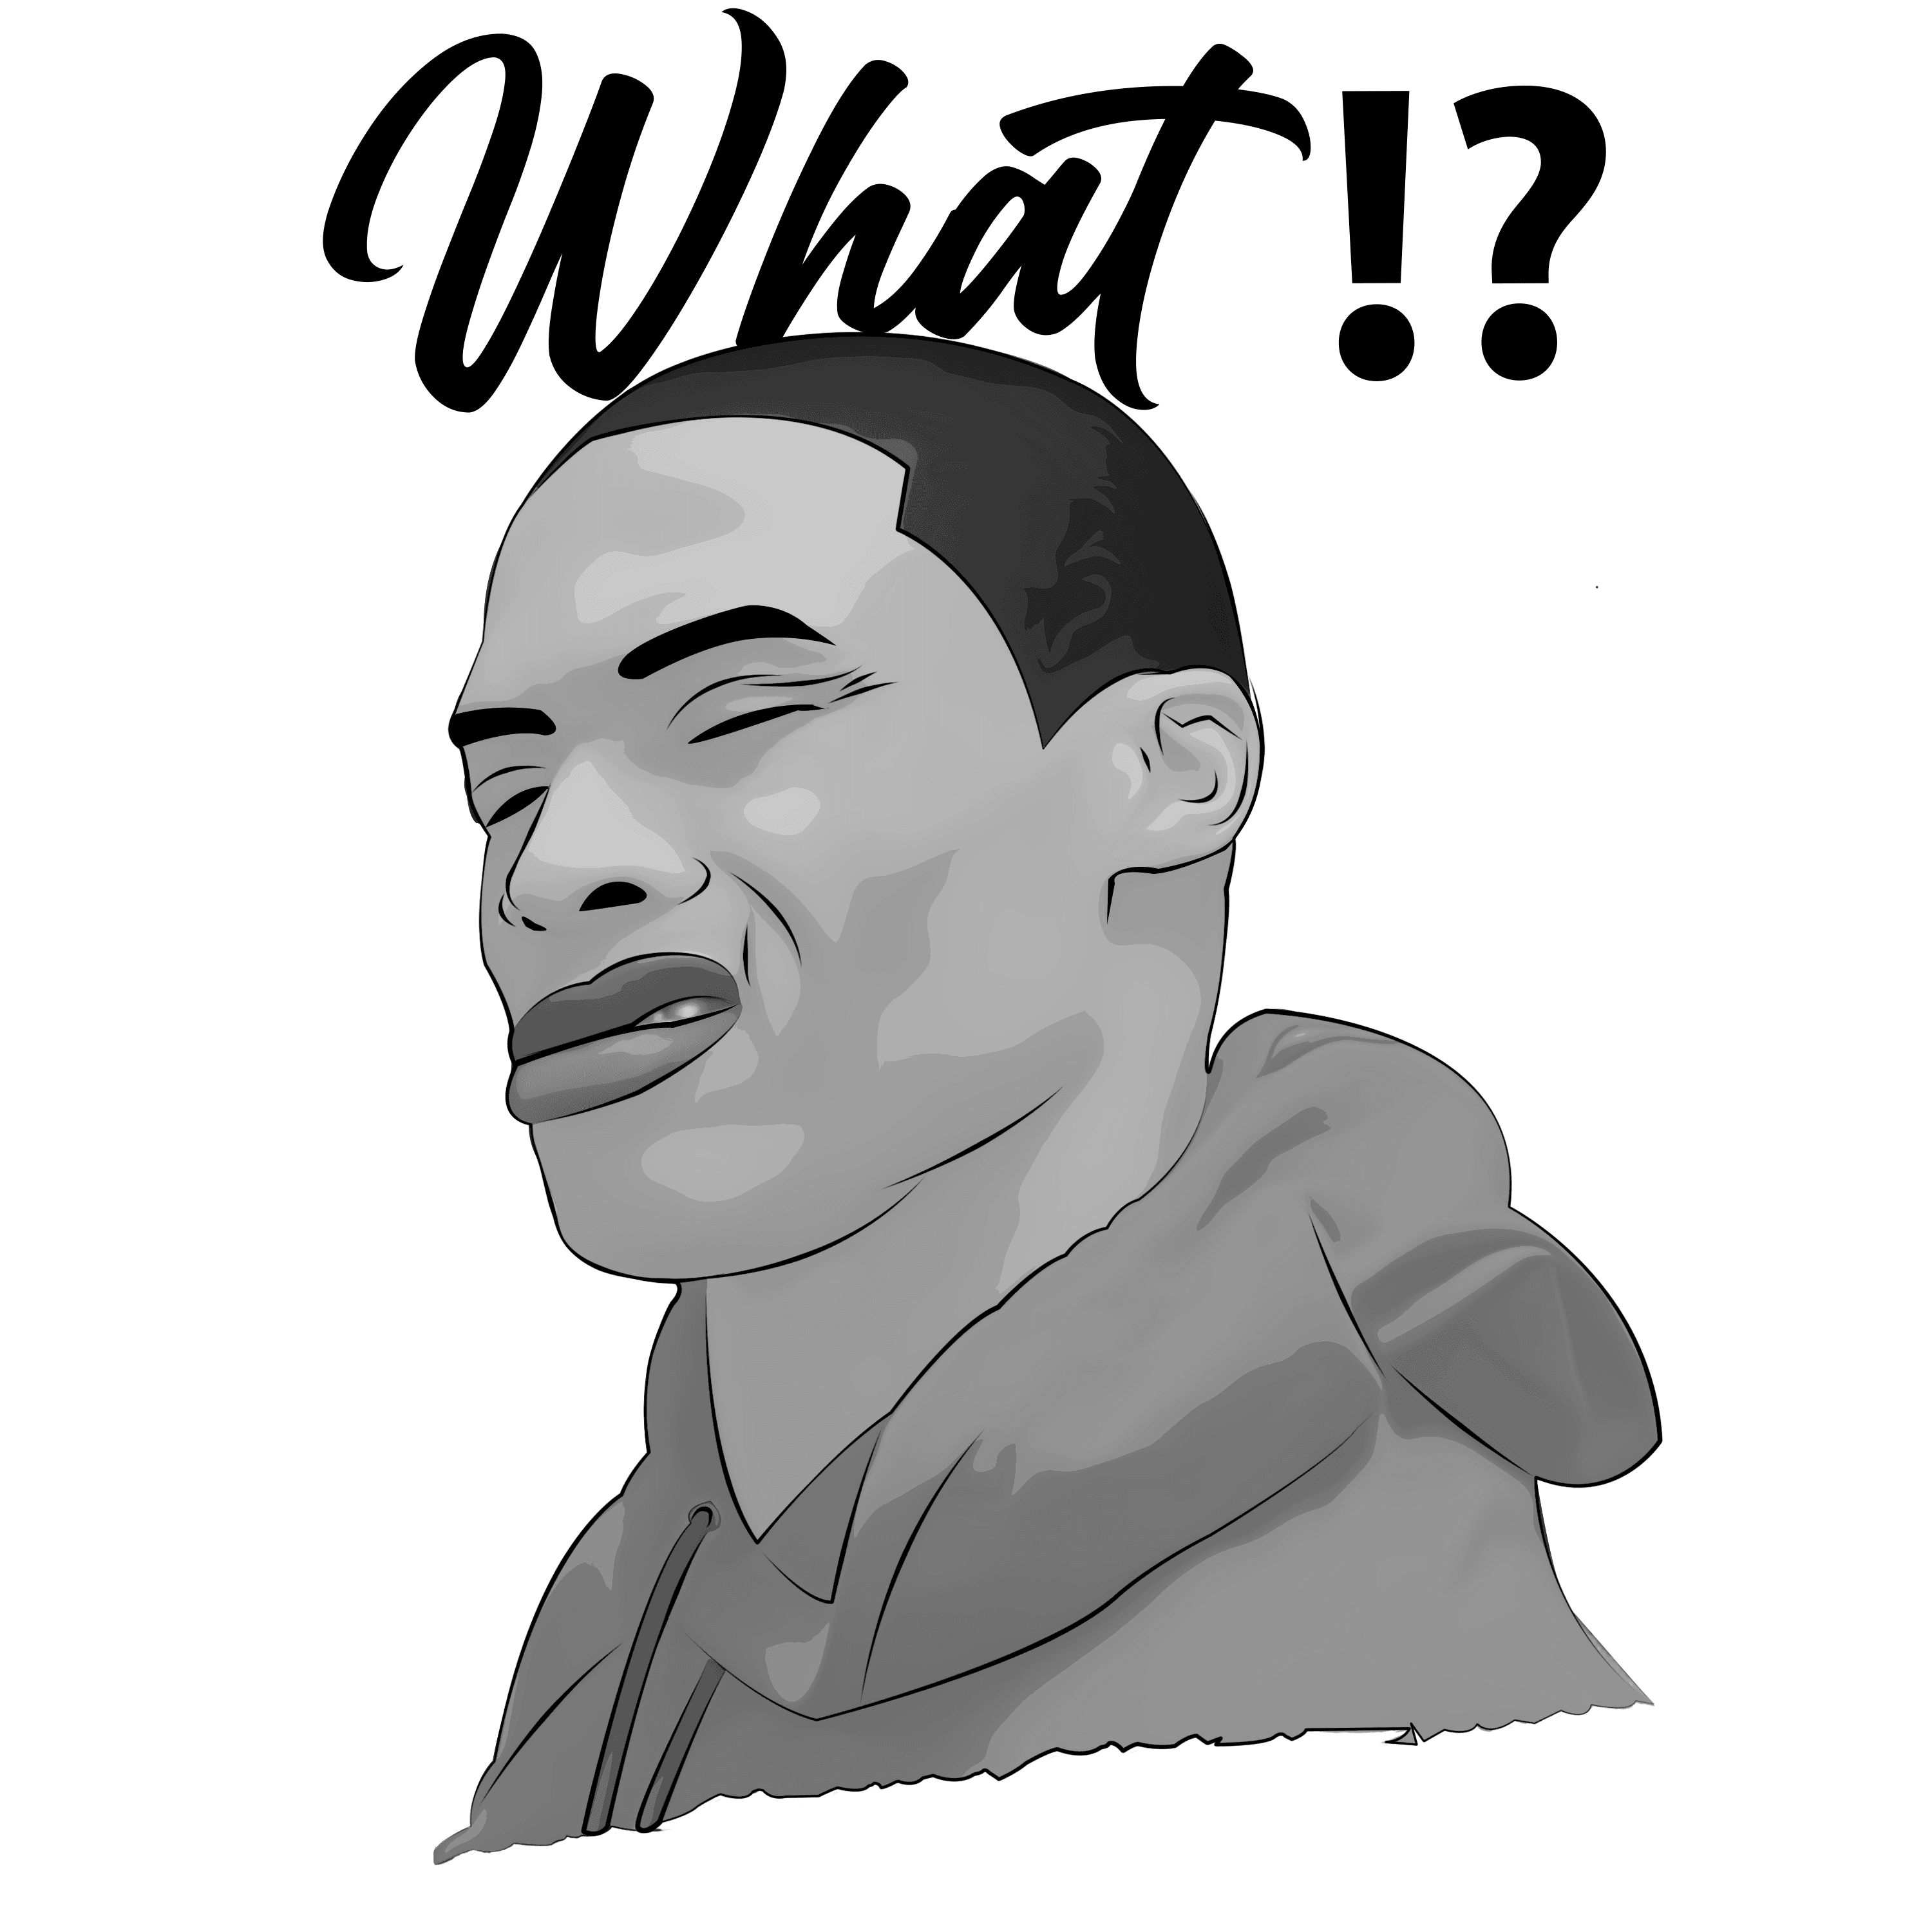 Russell - What!? (Black & White Edition)